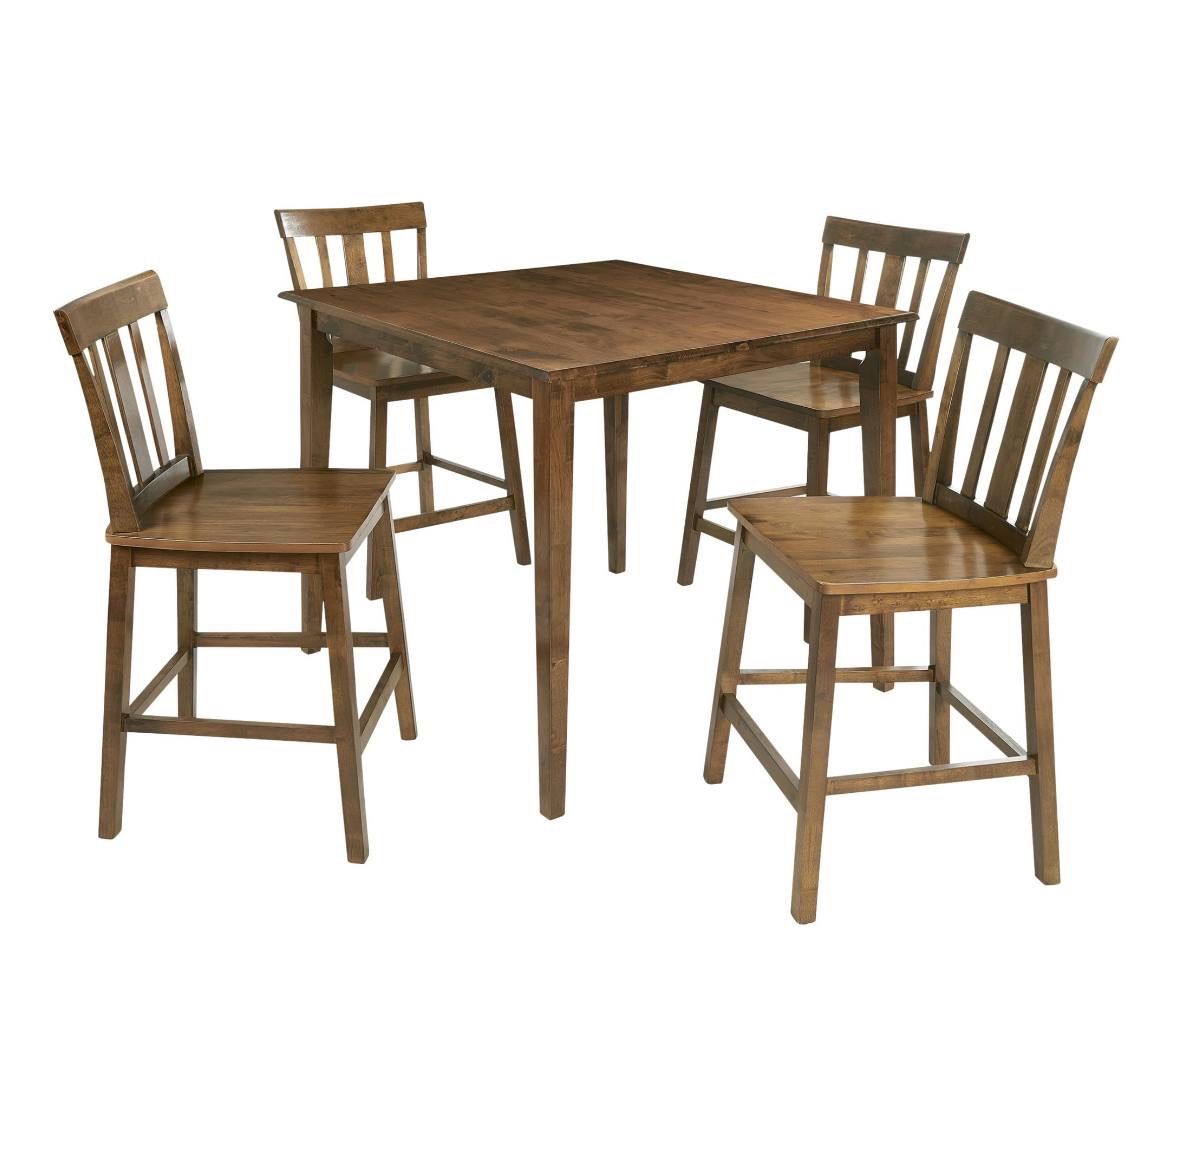 Mainstays 5 Piece Mission Counter Height Dining Set, Solid Wood, Cherry Color for Home. One table is a little bit damaged